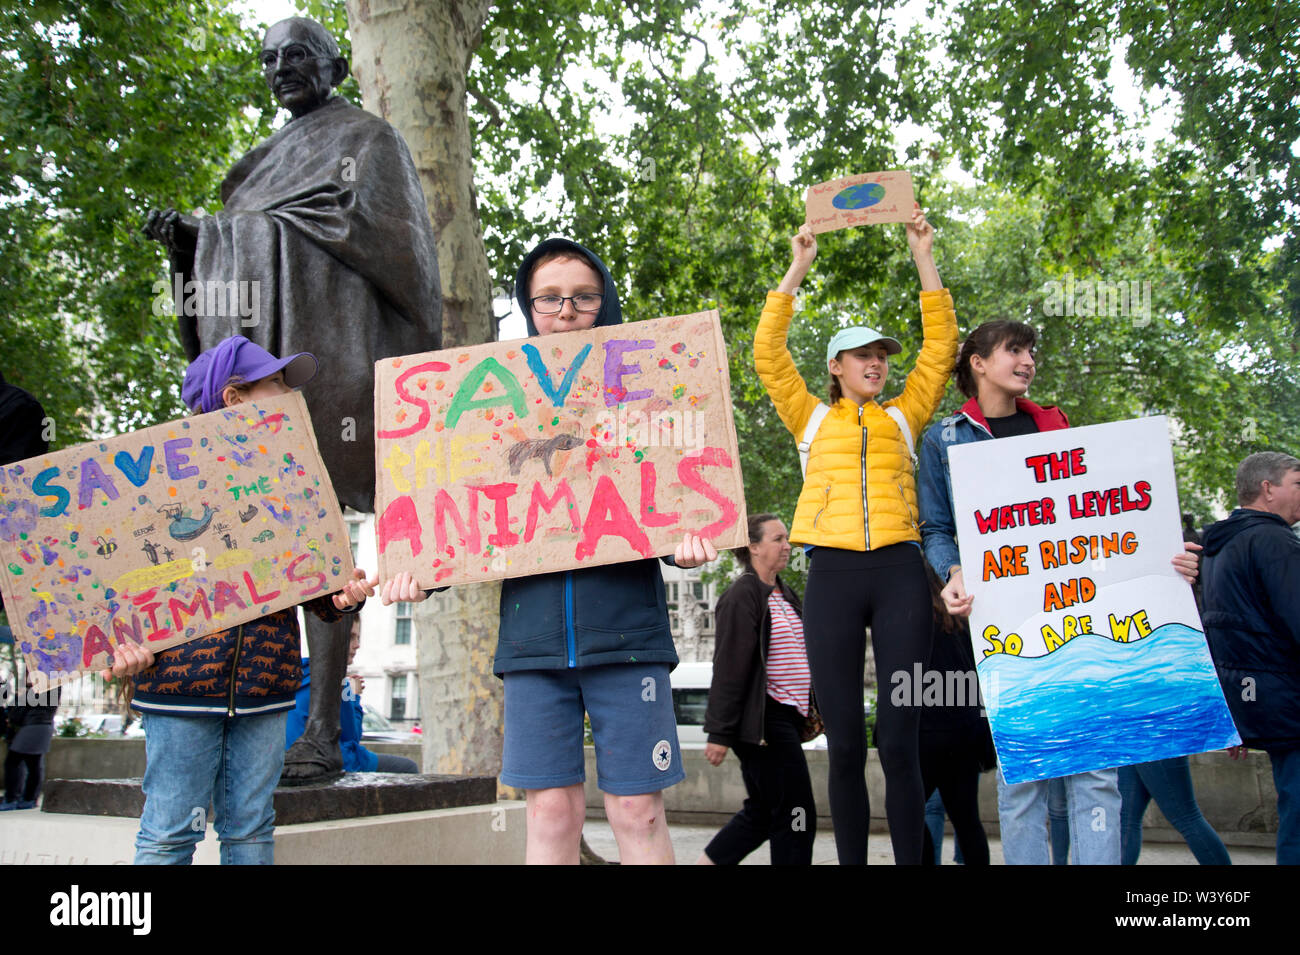 Westminster, Parliament Square. Children protest against the climate emergency. Stock Photo